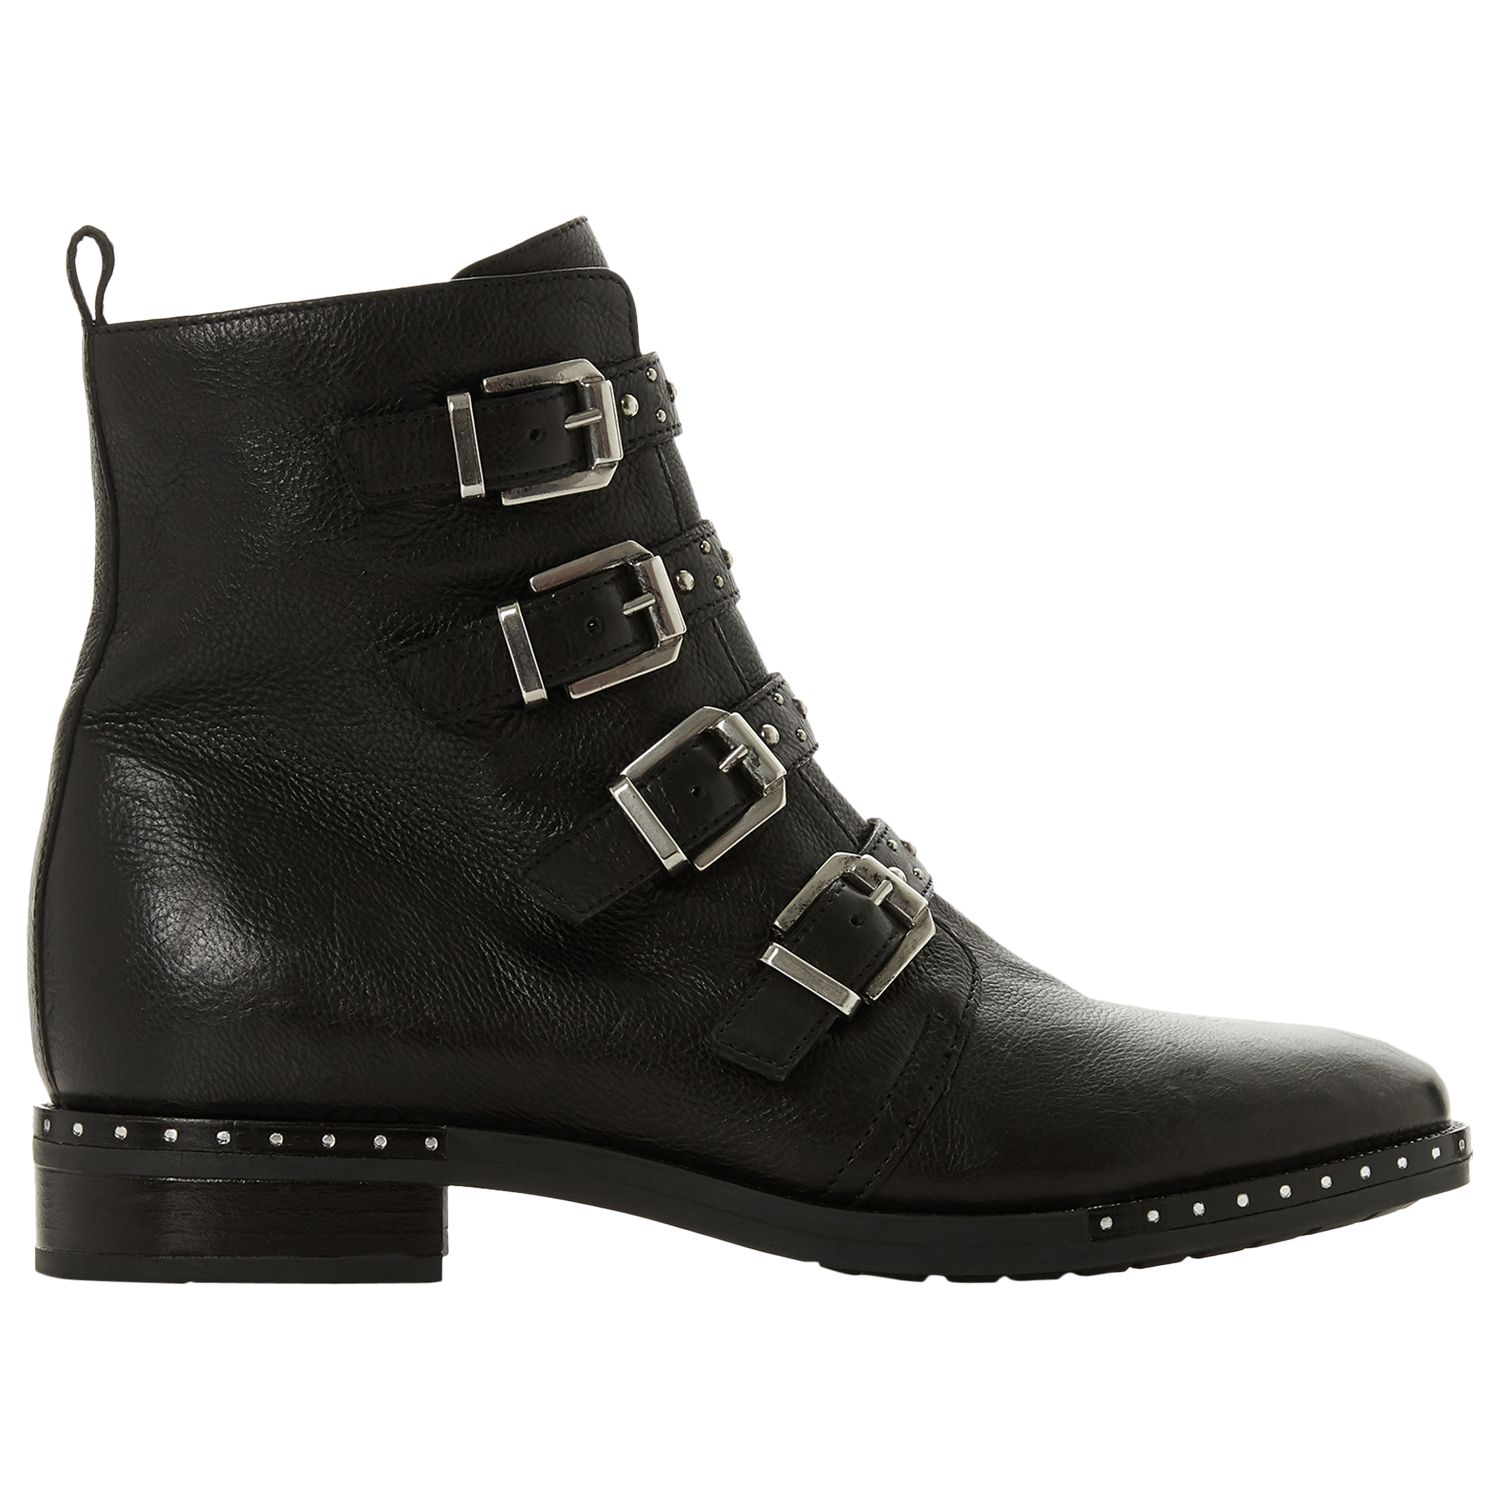 Dune Pixxel Studded Ankle Boots, Black Leather